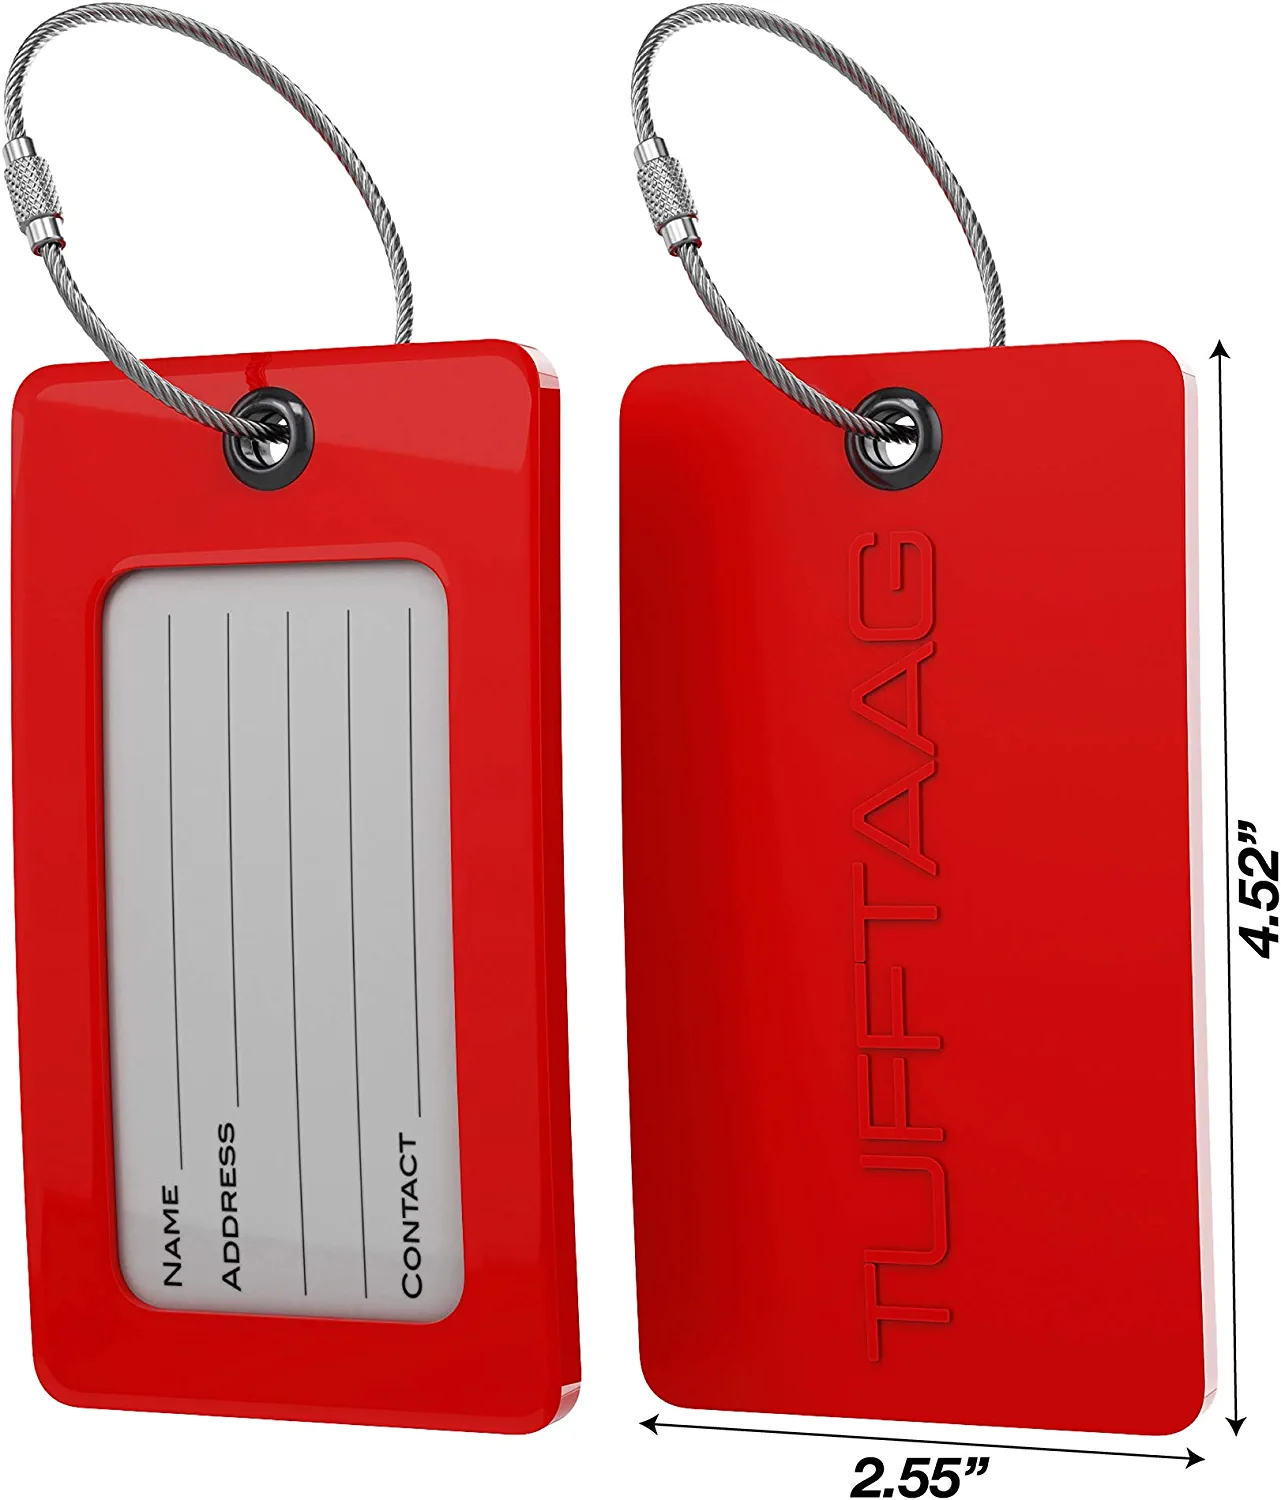 SUPREME LUGGAGE TAG Red Card Holder Key Travel $20.99 - PicClick